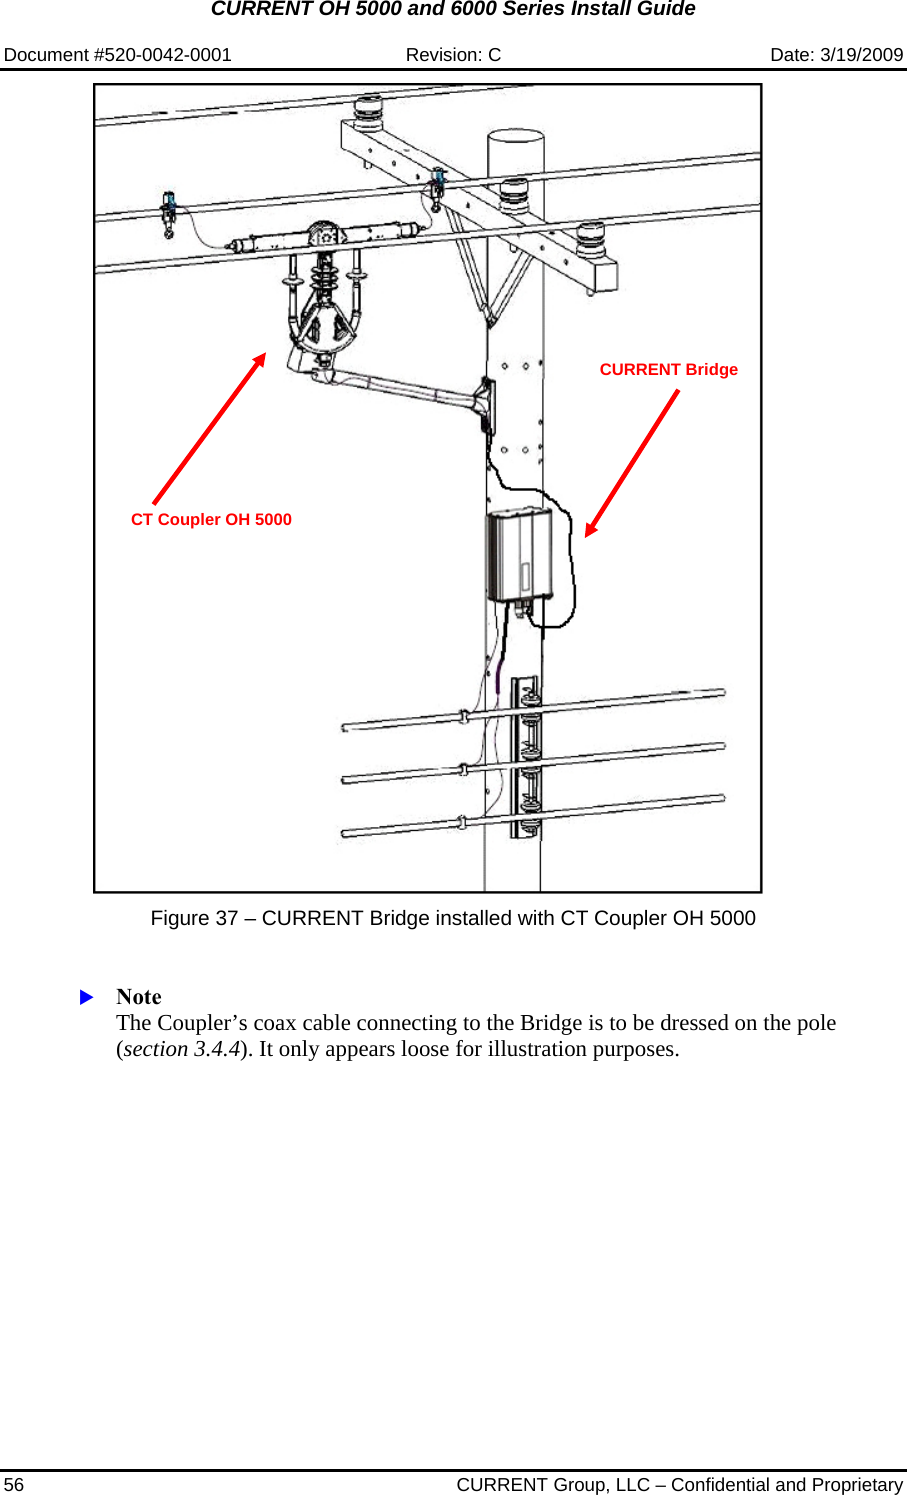 CURRENT OH 5000 and 6000 Series Install Guide  Document #520-0042-0001  Revision: C  Date: 3/19/2009 56  CURRENT Group, LLC – Confidential and Proprietary    Figure 37 – CURRENT Bridge installed with CT Coupler OH 5000   X Note  The Coupler’s coax cable connecting to the Bridge is to be dressed on the pole (section 3.4.4). It only appears loose for illustration purposes.  CURRENT Bridge CT Coupler OH 5000 